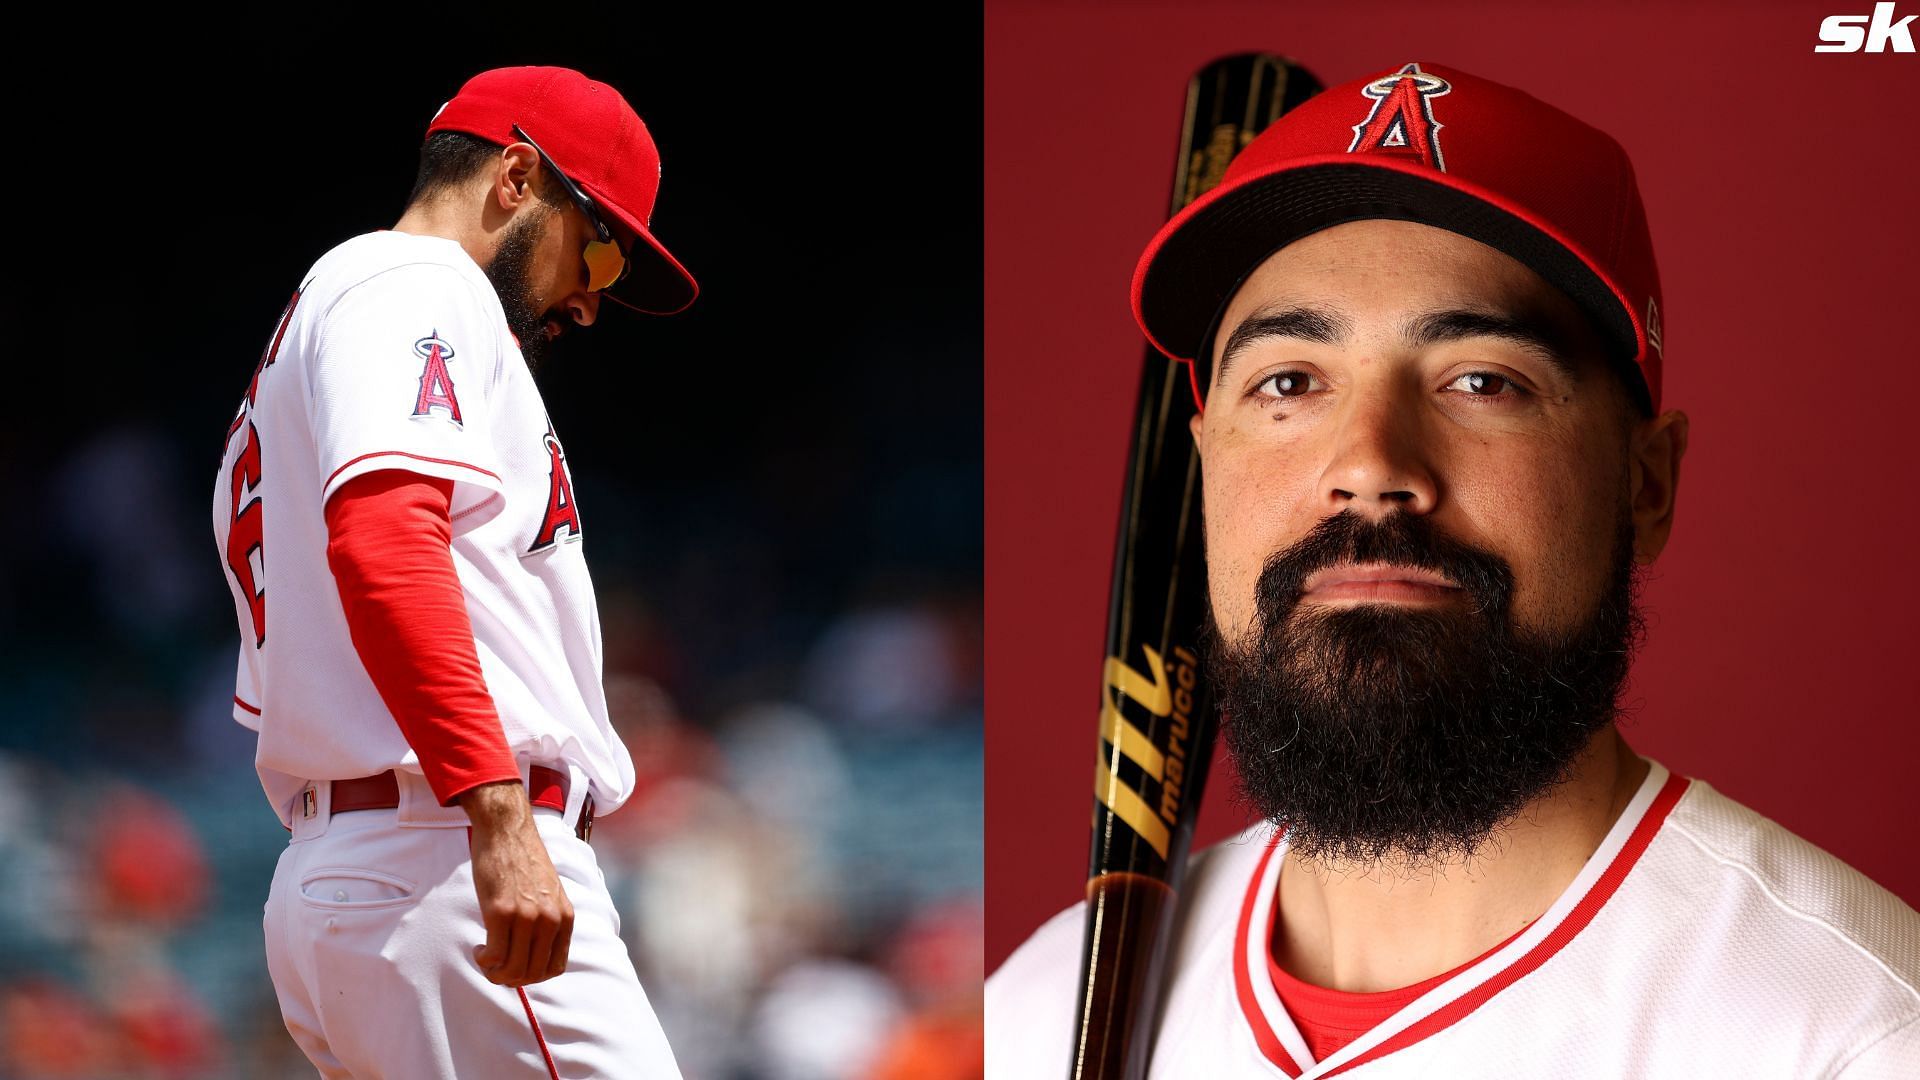 Anthony Rendon of the Los Angeles Angels poses for a portrait during photo day at Tempe Diablo Stadium